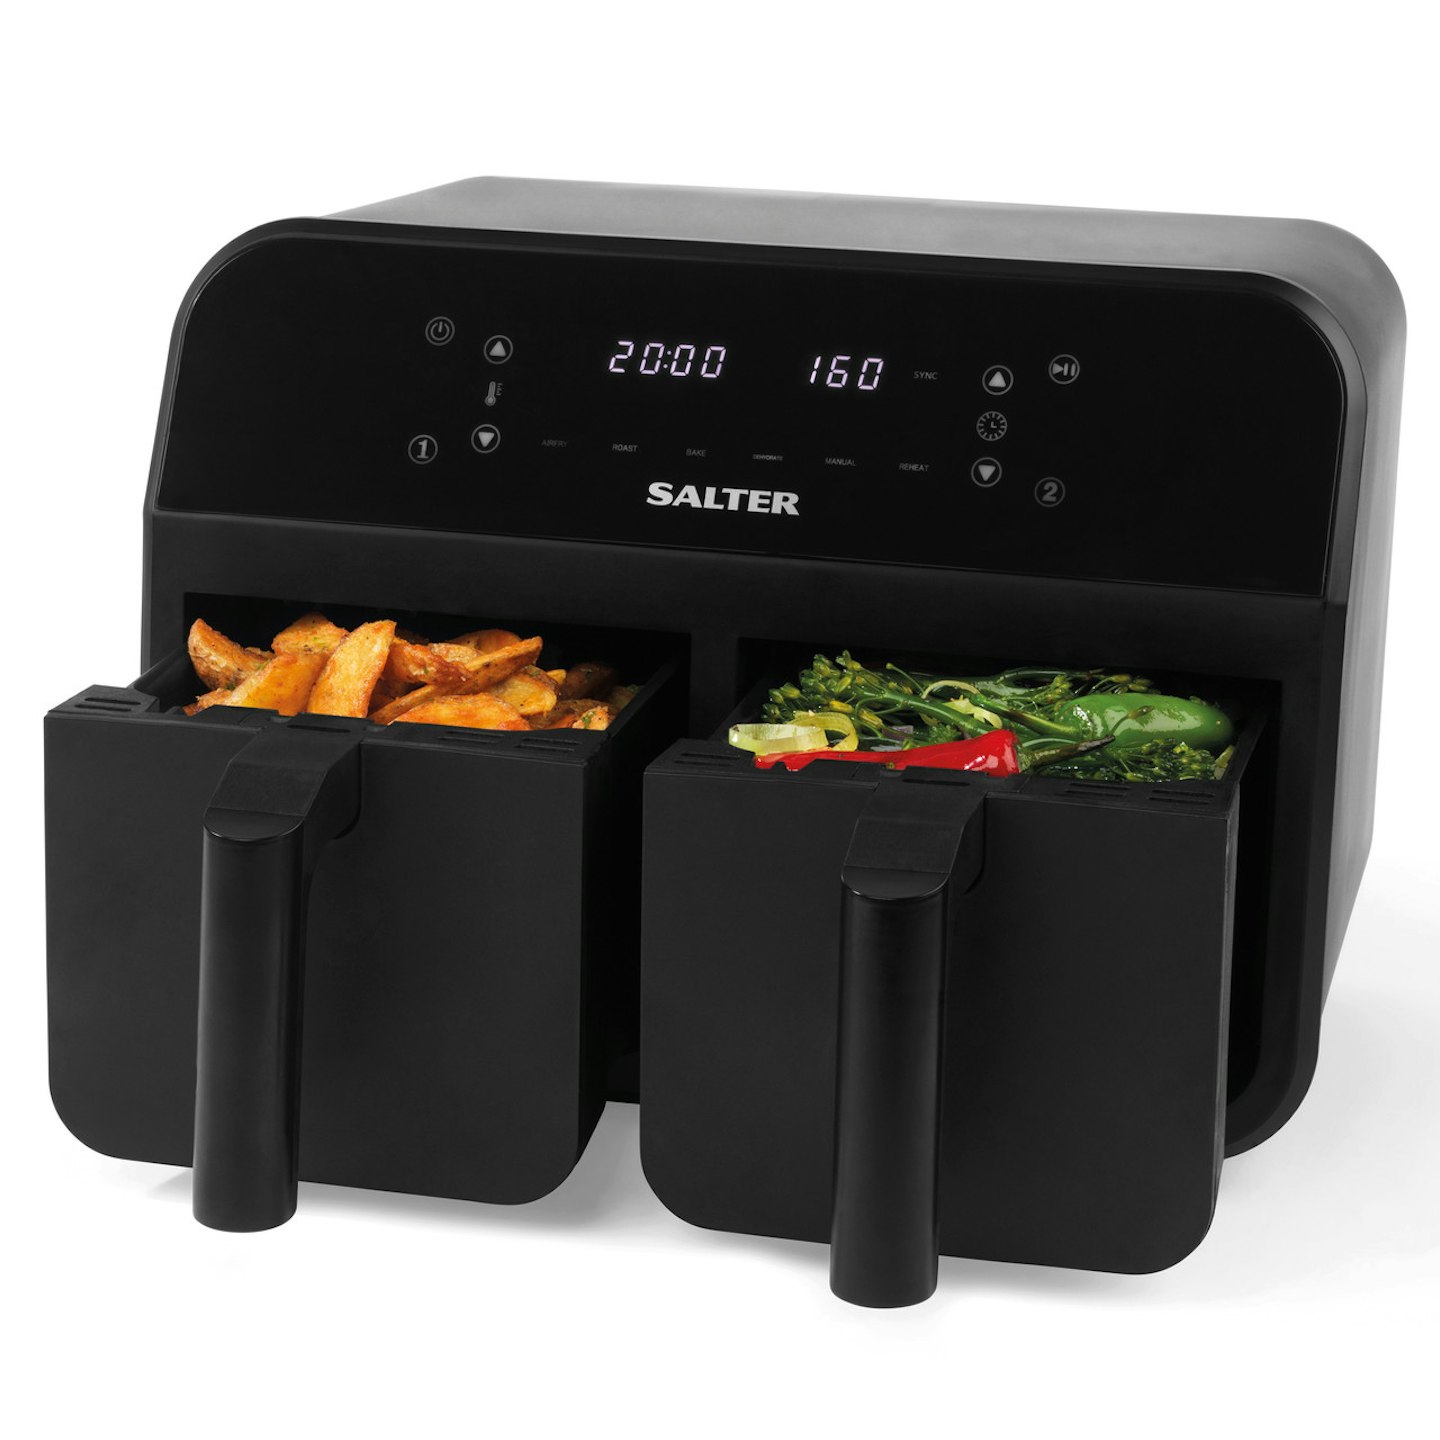 Salter Dual Cook Pro Air Fryer review: It makes cooking easy